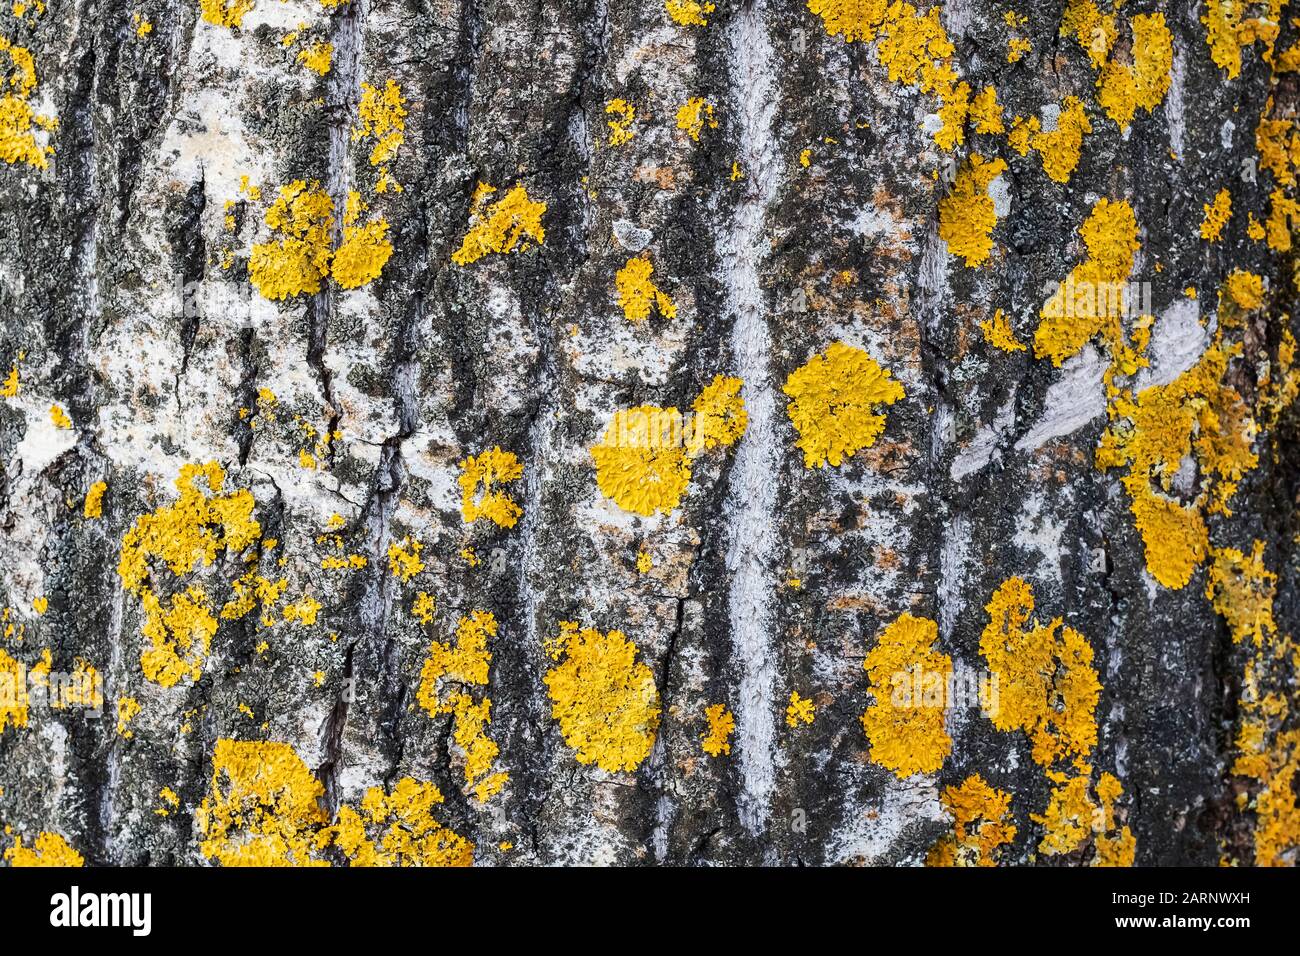 Yellow moss on a tree trunk close up Stock Photo